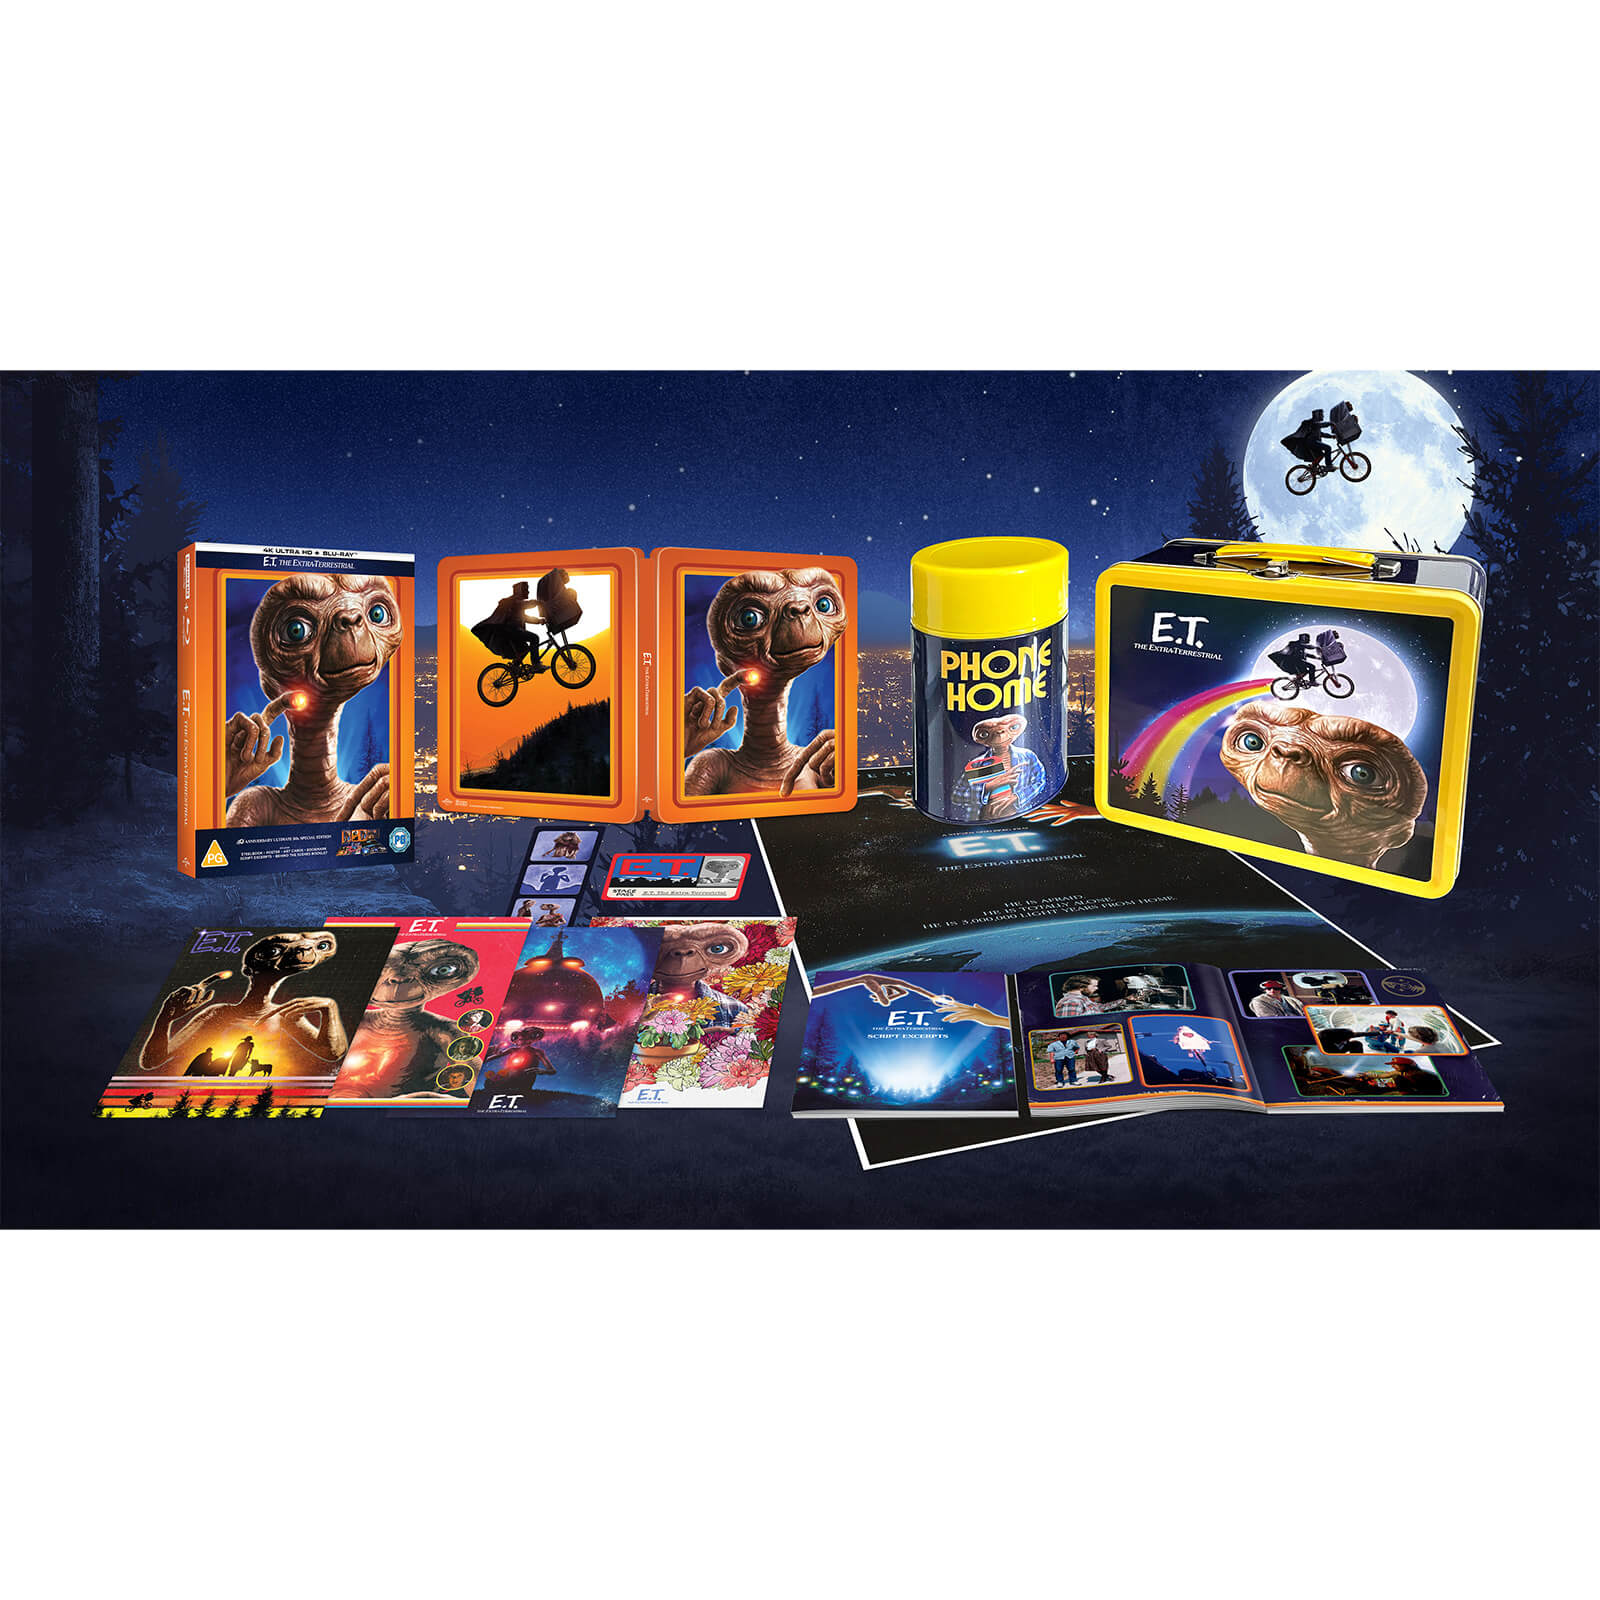 E.T. The Extra-Terrestrial 40th Anniversary Ultimate 80s Special Edition Zavvi Exclusive 4K Ultra HD Steelbook Set (includes Blu-ray)